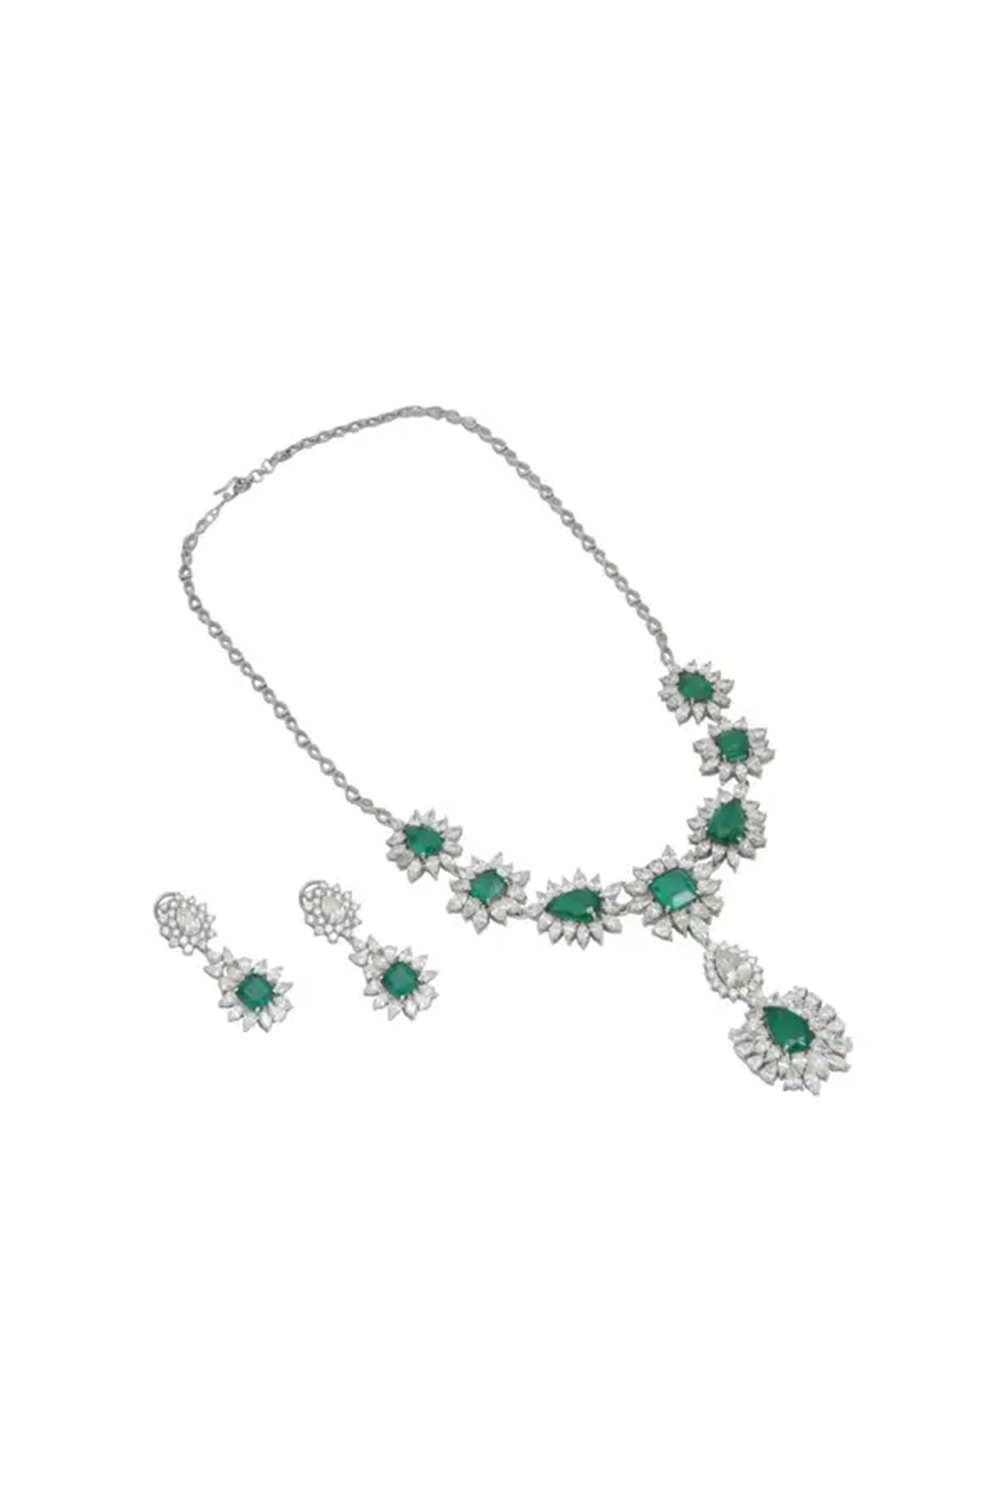 Natural emerald Necklace with 36.39 carats Diamond & 28.53 cts Emerald in 14k Gold